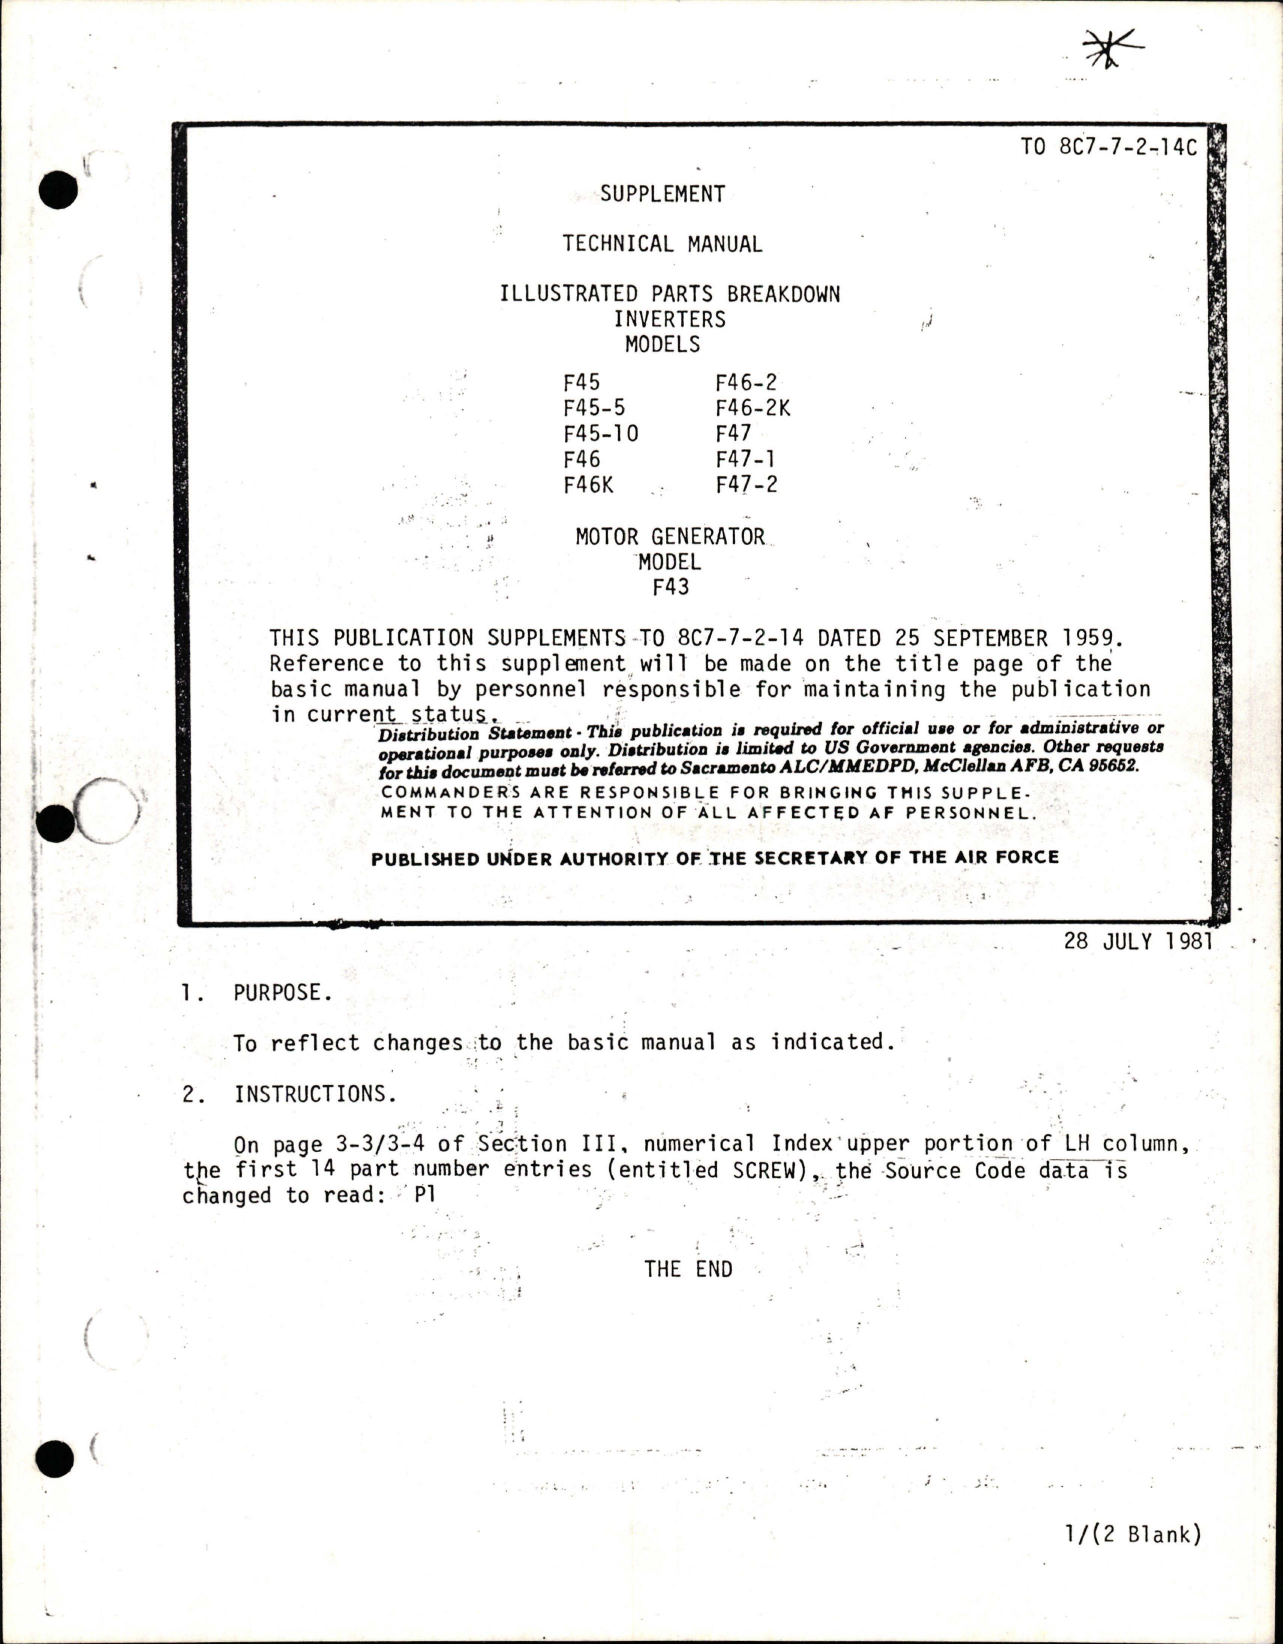 Sample page 1 from AirCorps Library document: Supplement to Illustrated Parts Breakdown for Inverters and Motor Generator - Model F43